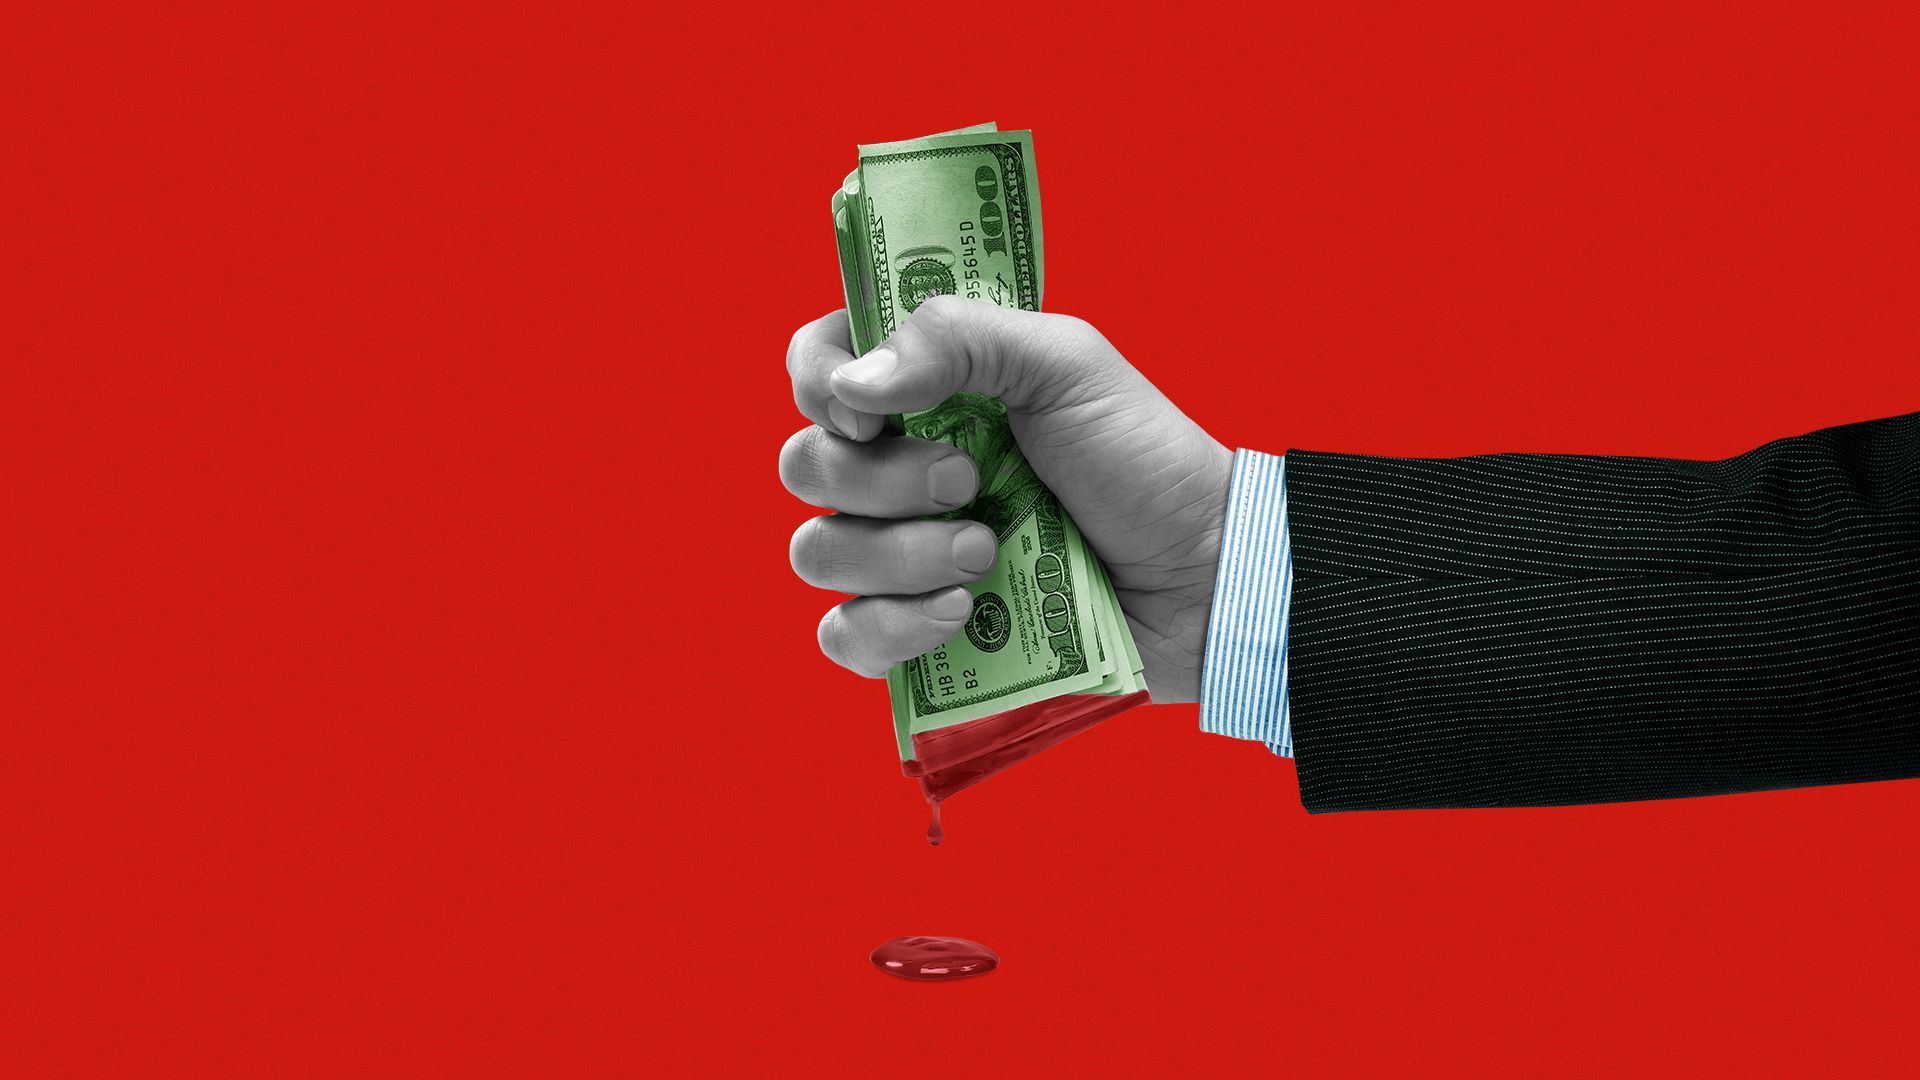 Illustration of a hand squeezing a stack of money with blood coming from the bottom